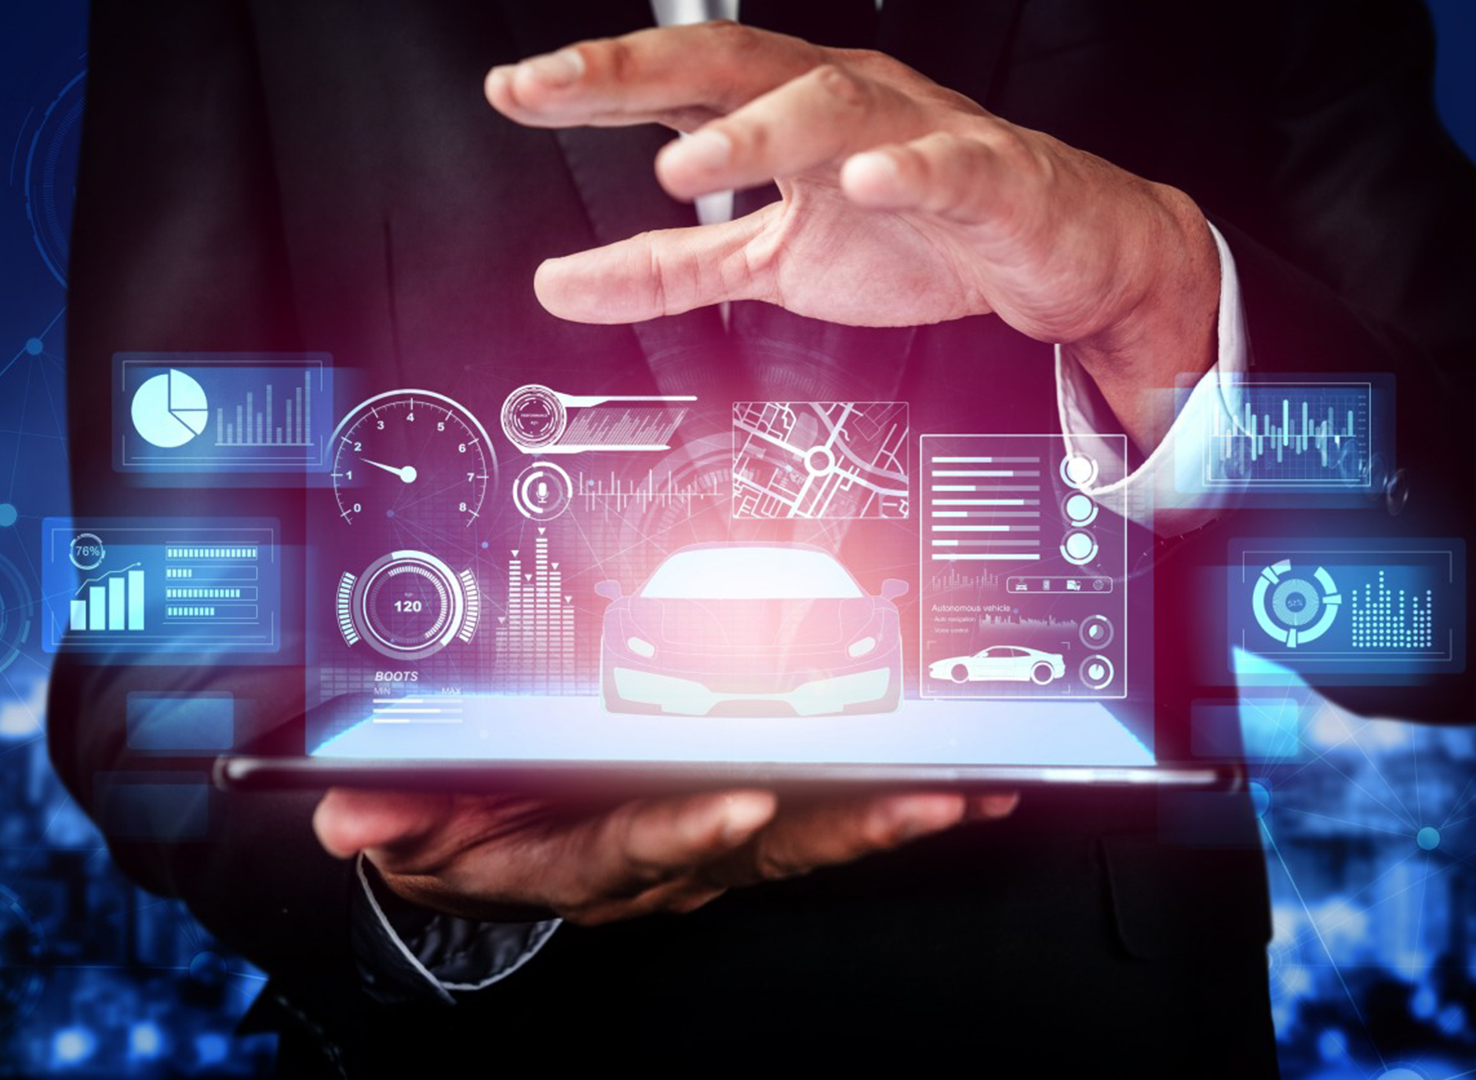 Benefits of Using IoT in the Automotive Industry